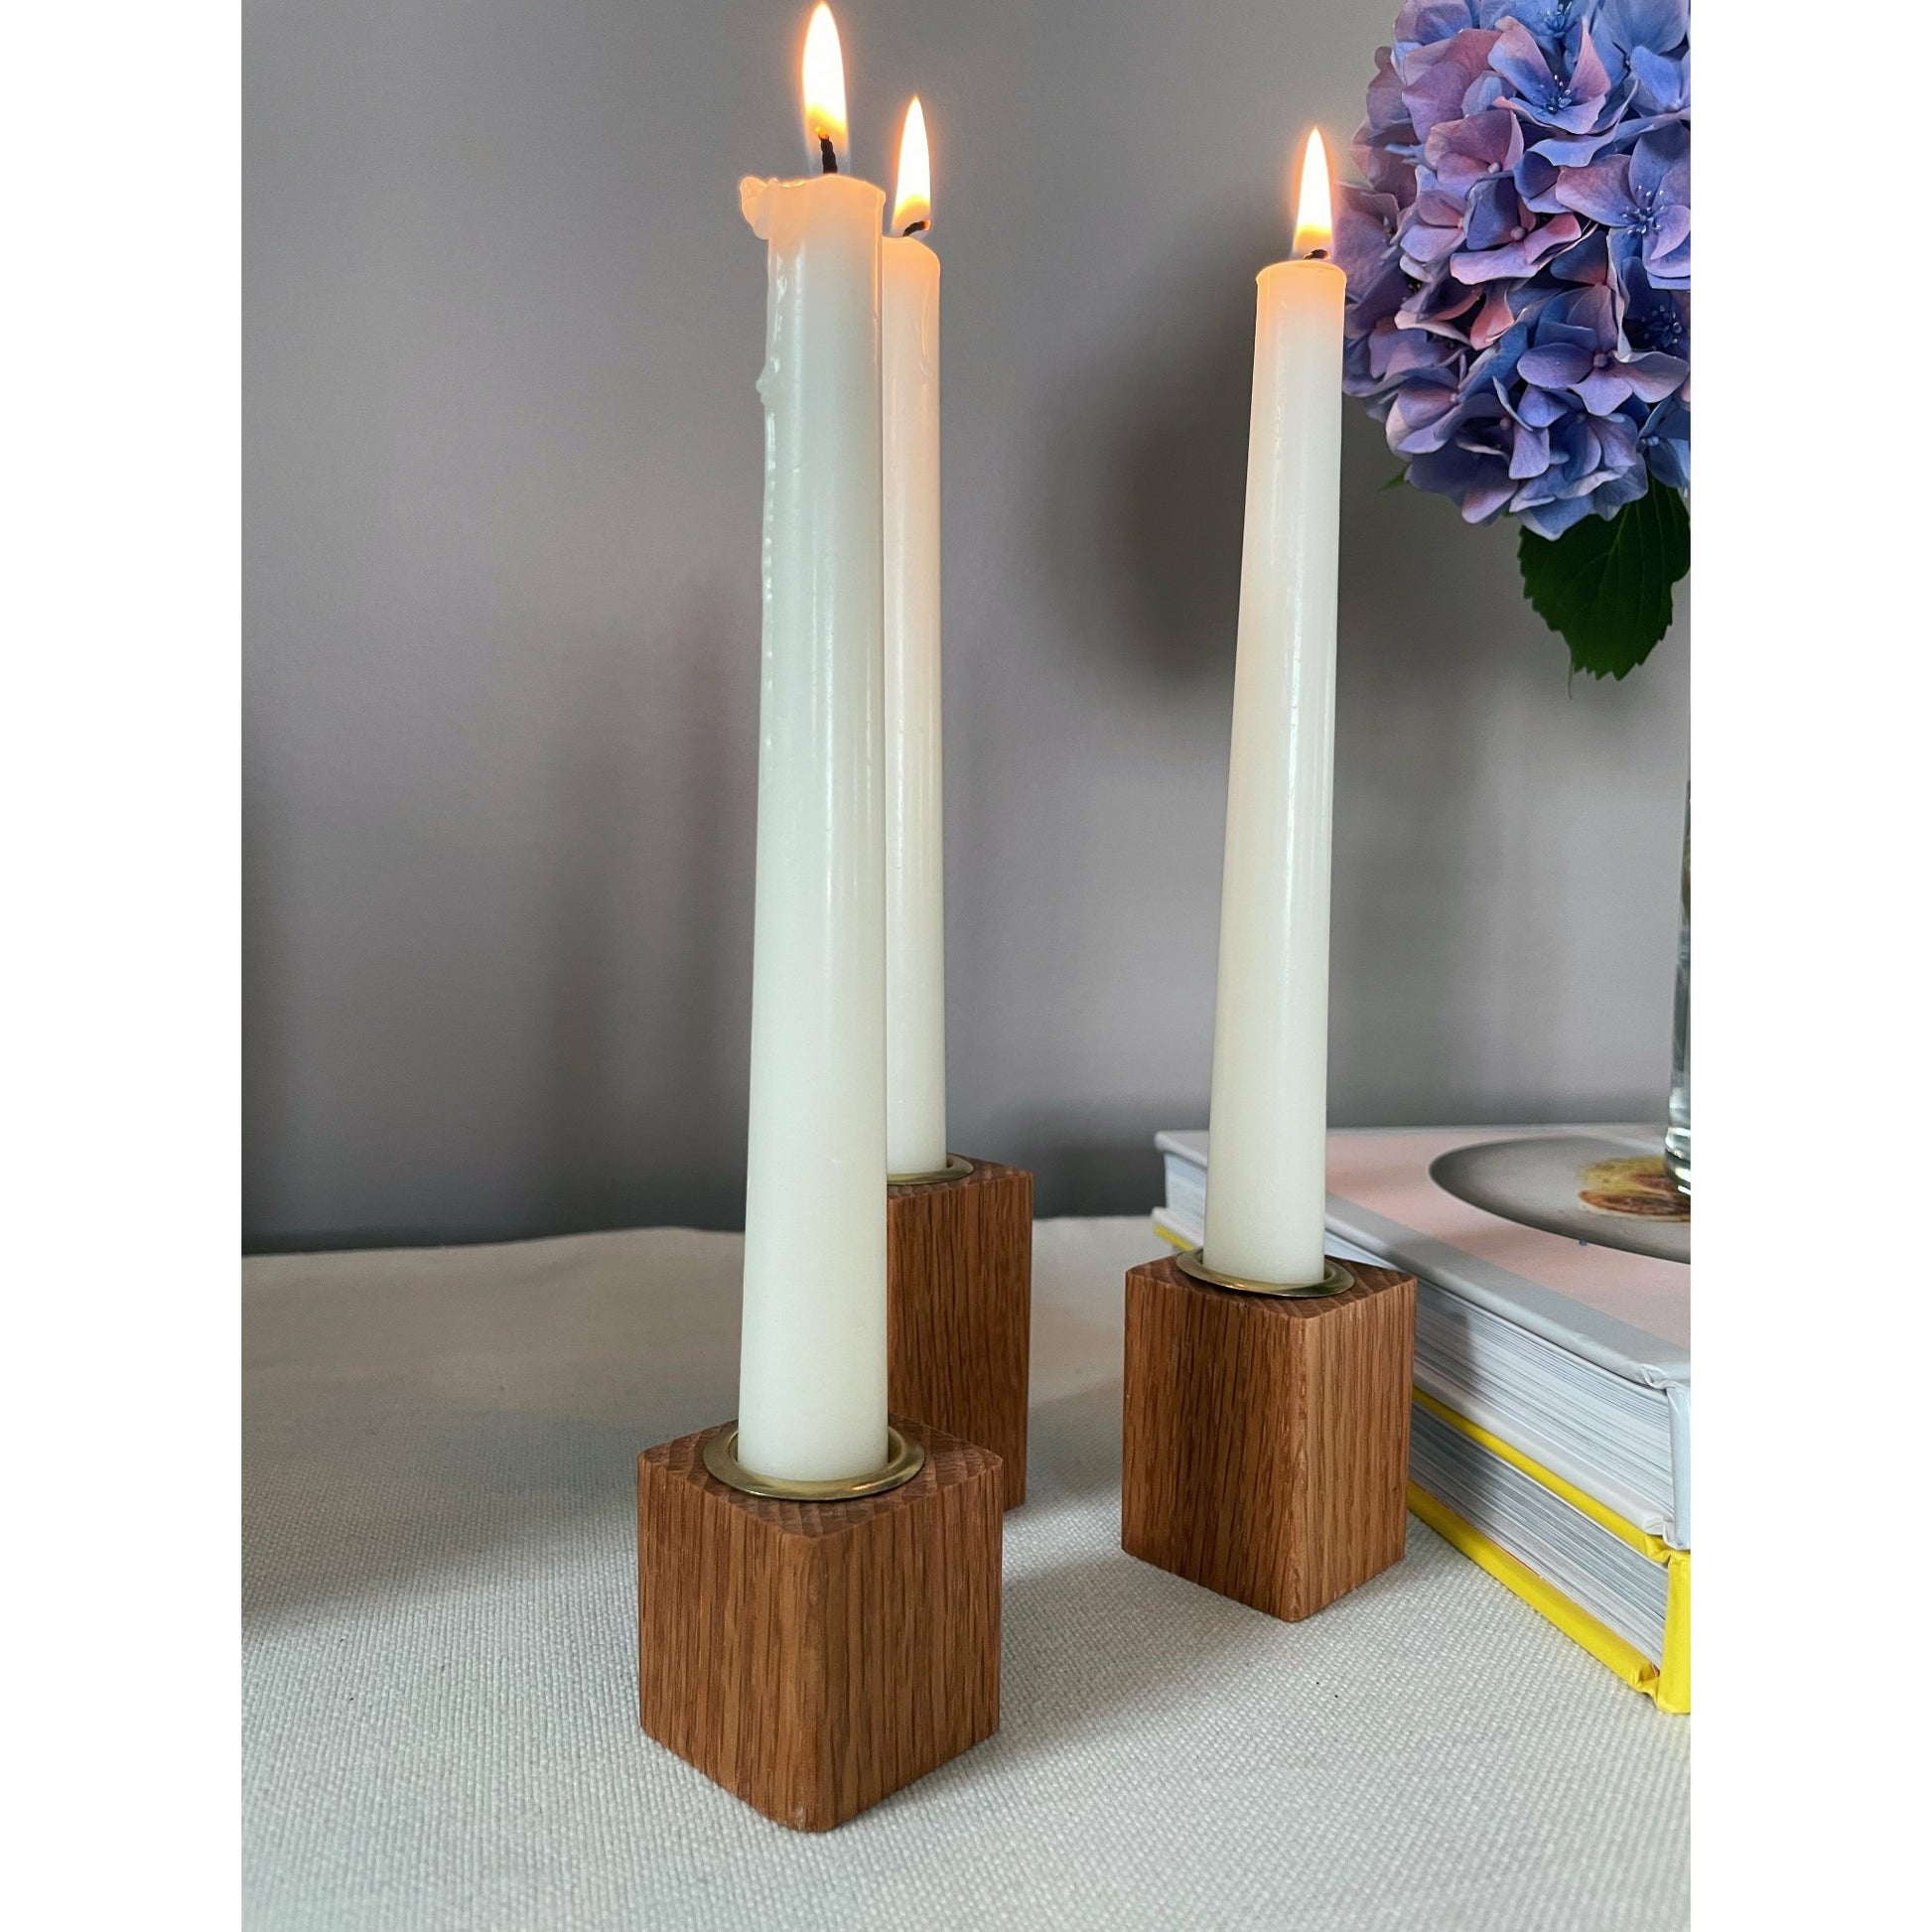 Ceramic Taper Candle Holder, Candle Holders for Candlesticks with 4 Holes,  Modern Candlesticks Holders, Table Centerpiece Candle Stick Holders for